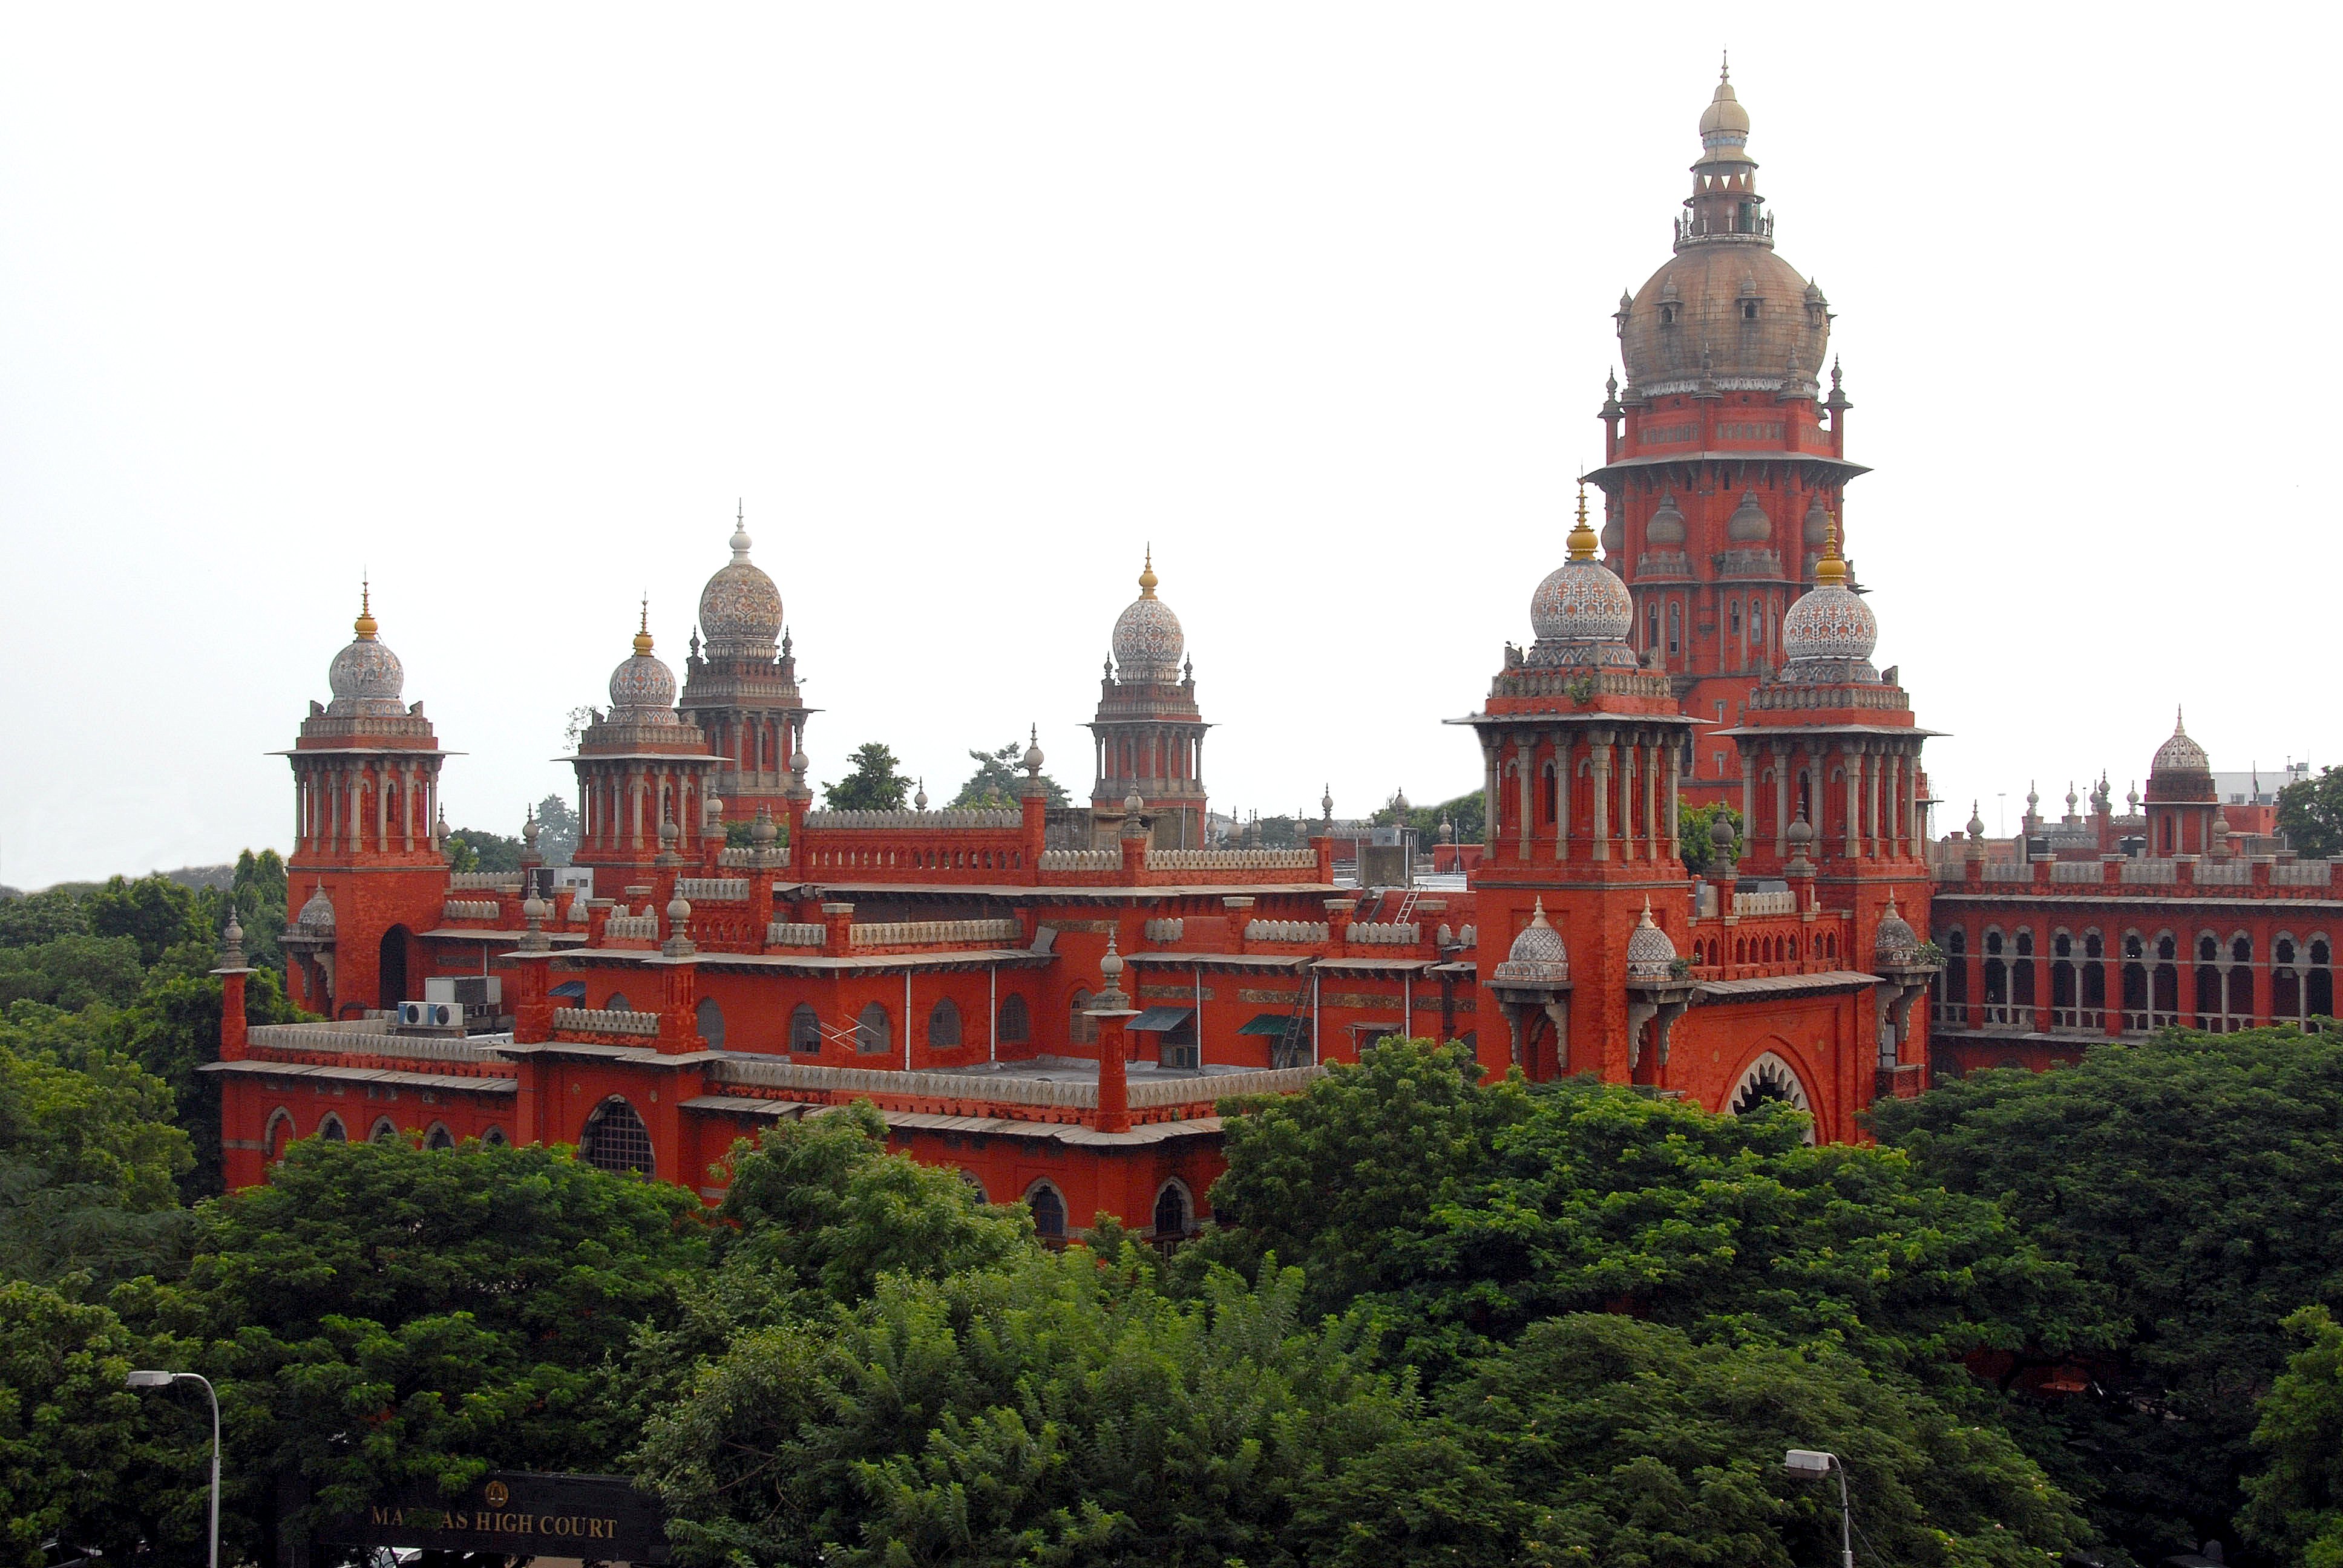 High courts of Bombay, Calcutta and Madras renamed as per their City names